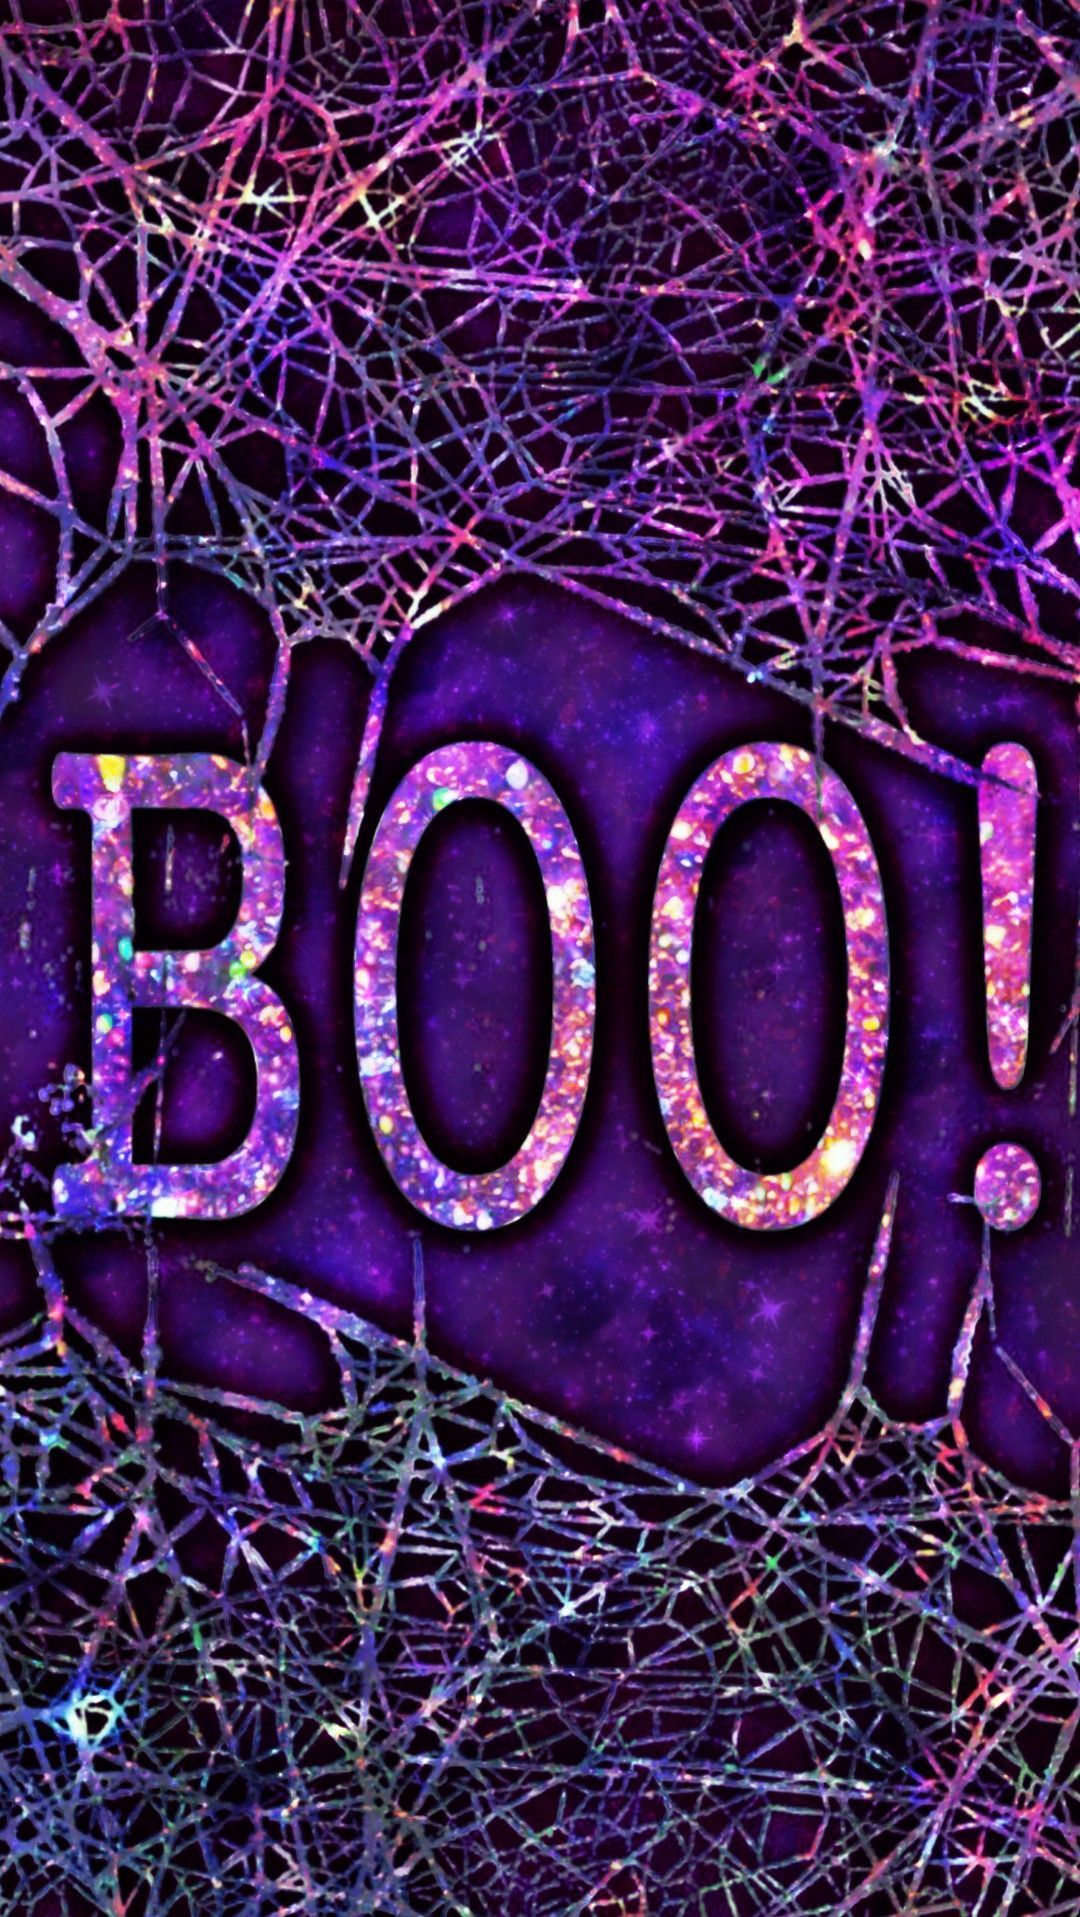 Galaxy BOO!, made by me #purple #sparkly #wallpaper #background #glitter #sparkles #galaxy #boo #hal. Halloween wallpaper, Glittery wallpaper, Sparkly halloween